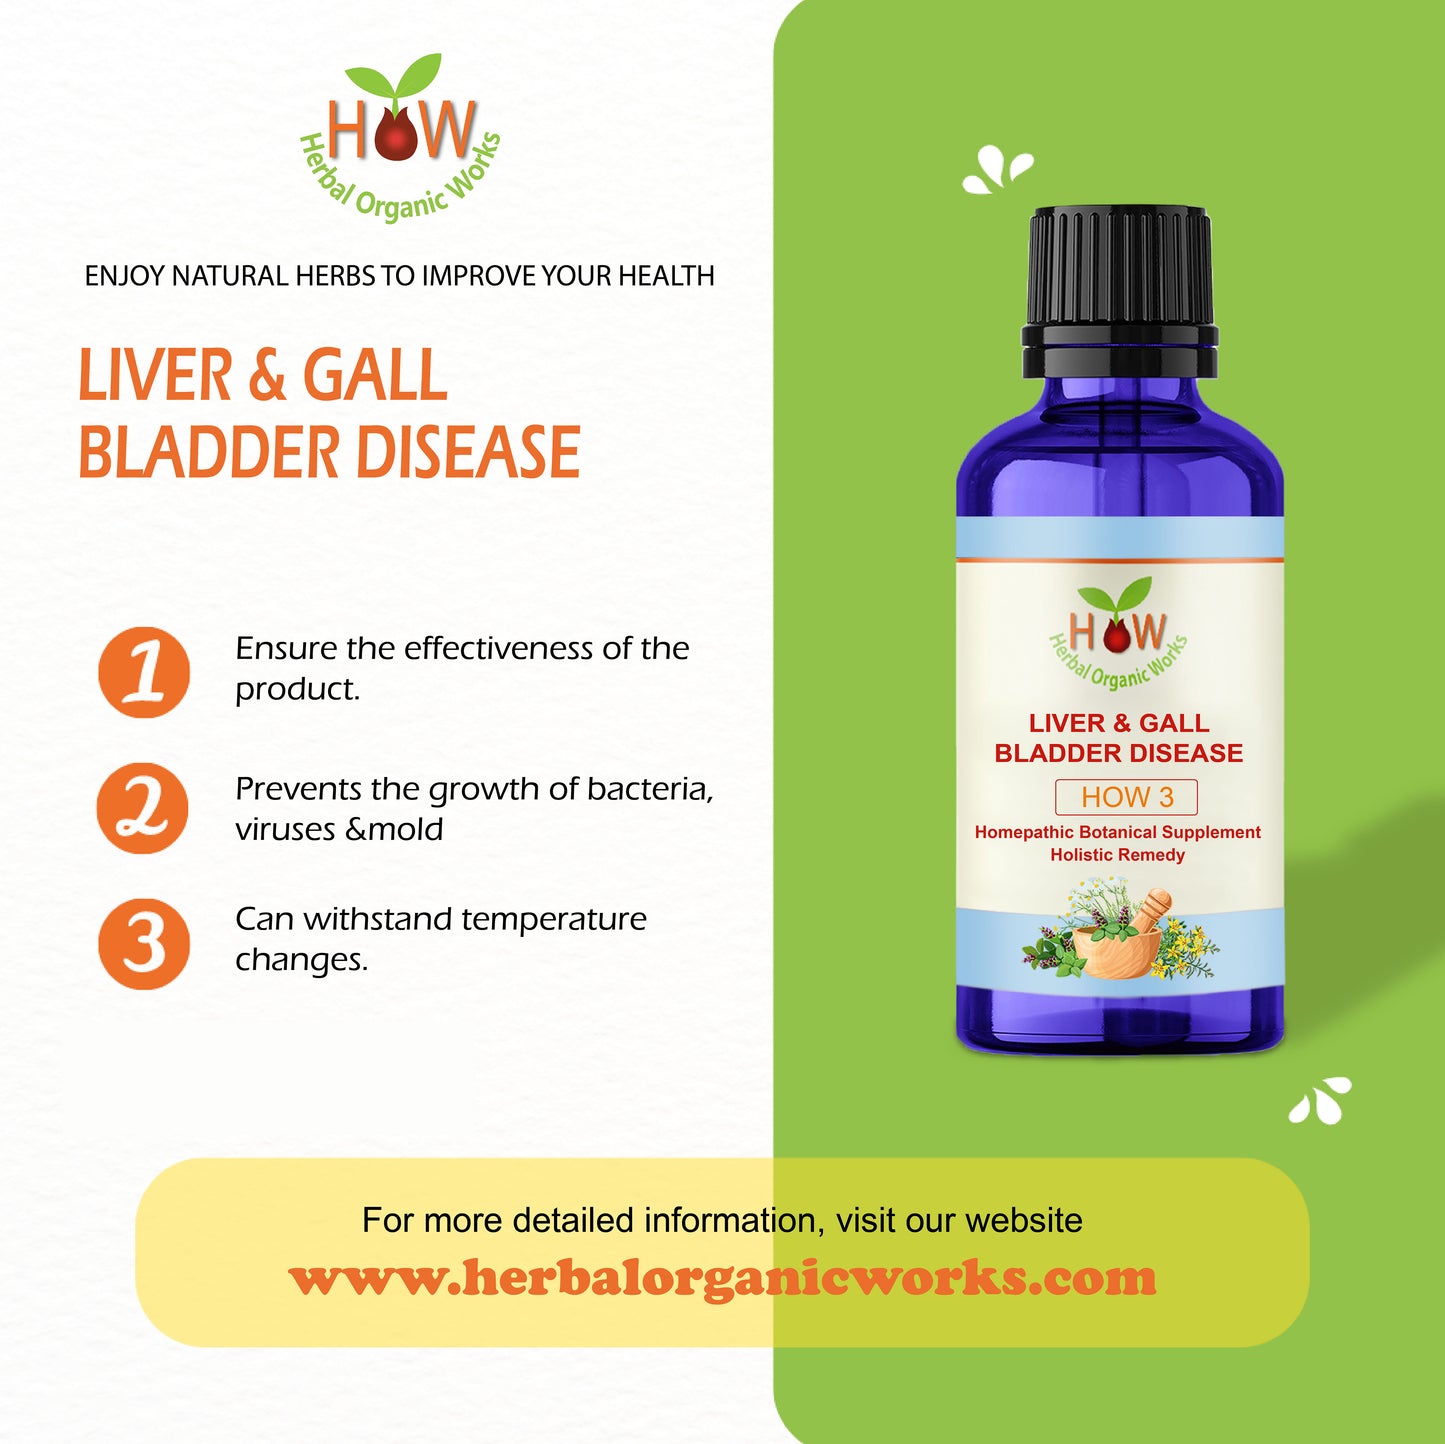 LIVER AND GALLBLADDER DISEASE NATURAL REMEDY (HOW3)